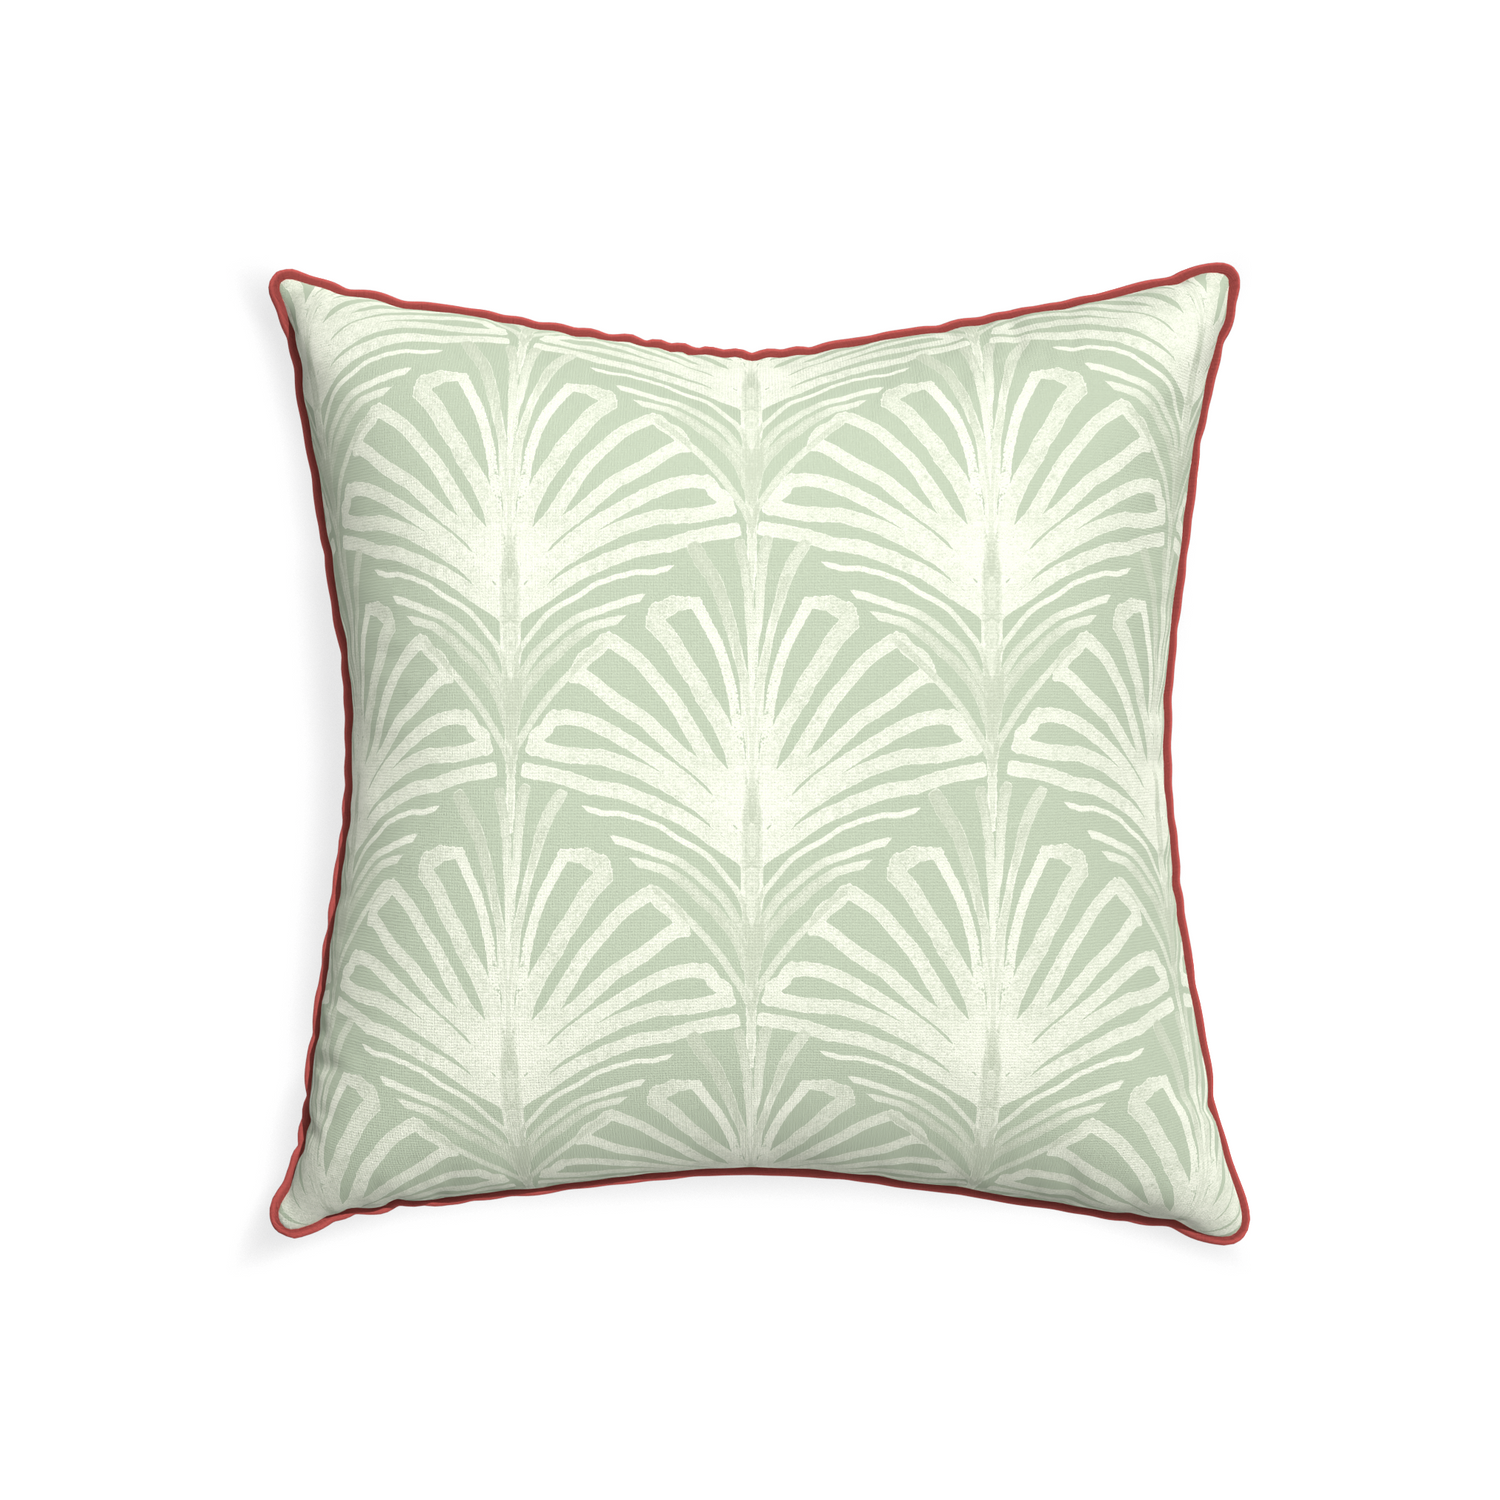 22-square suzy sage custom pillow with c piping on white background